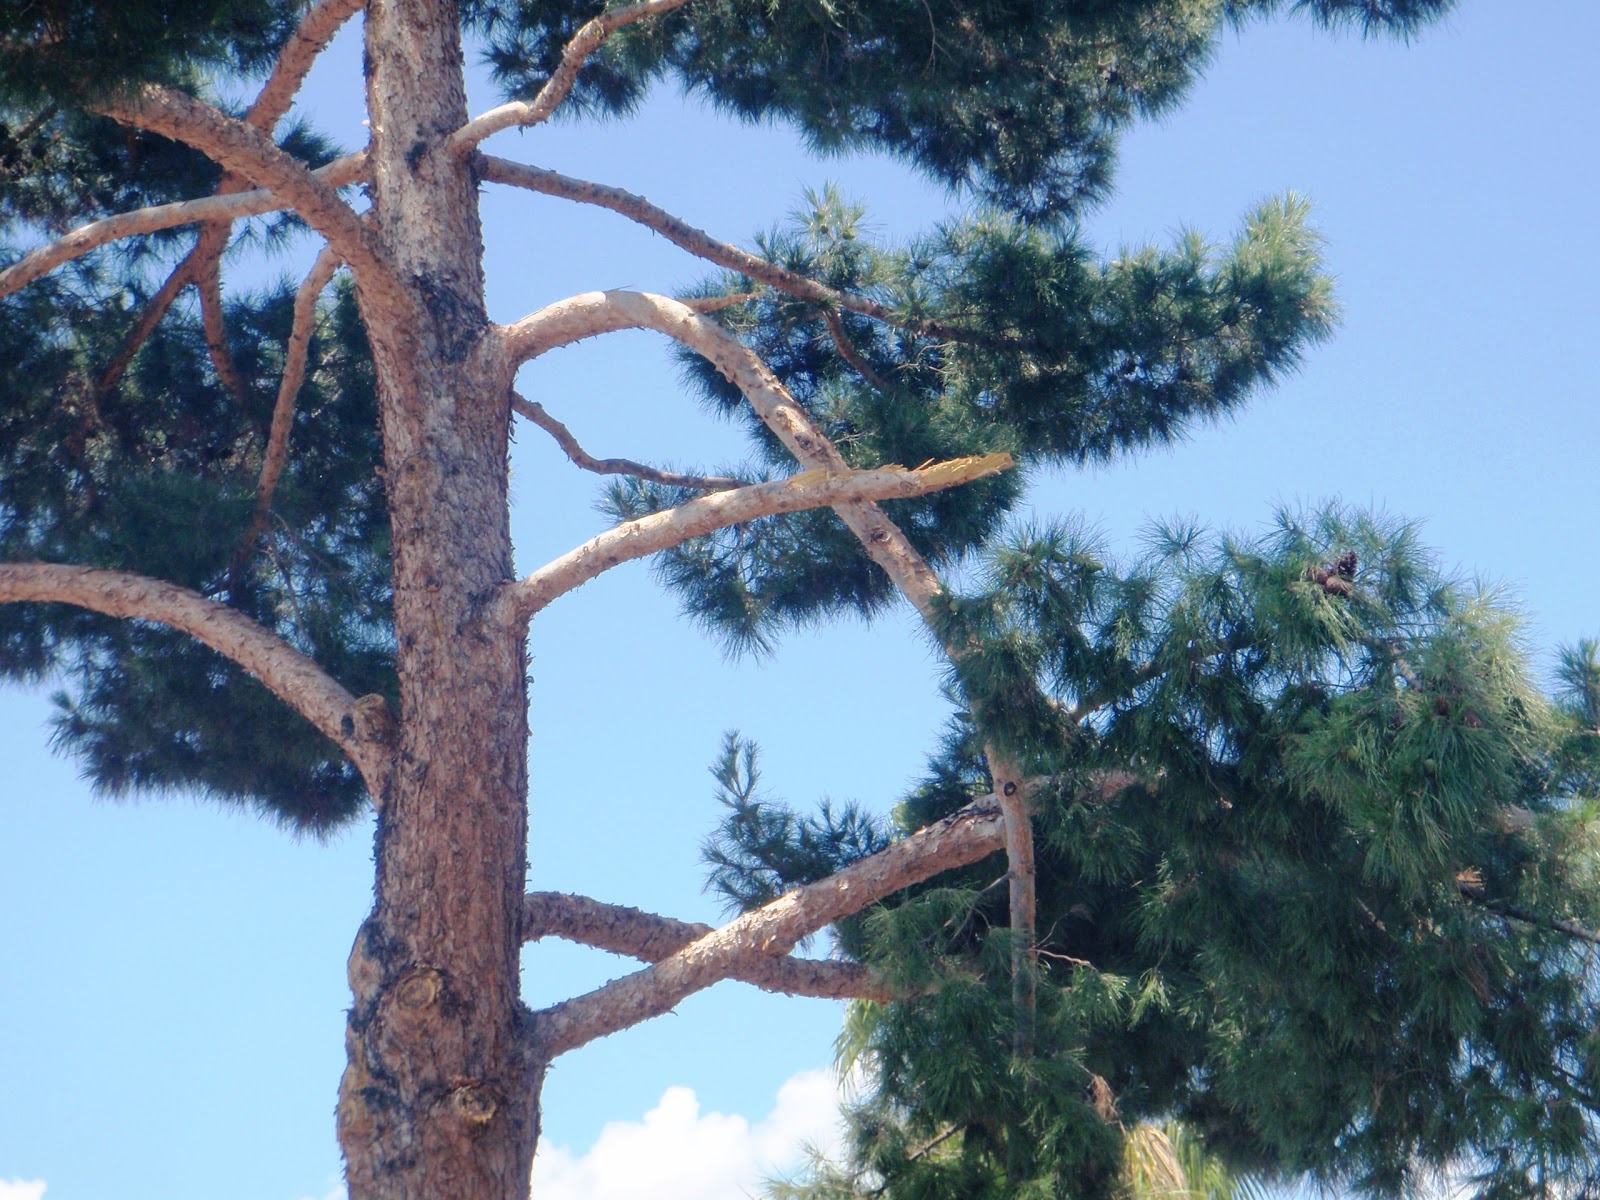 Xtremehorticulture of the Desert: When and How Do You Prune Pine Trees?